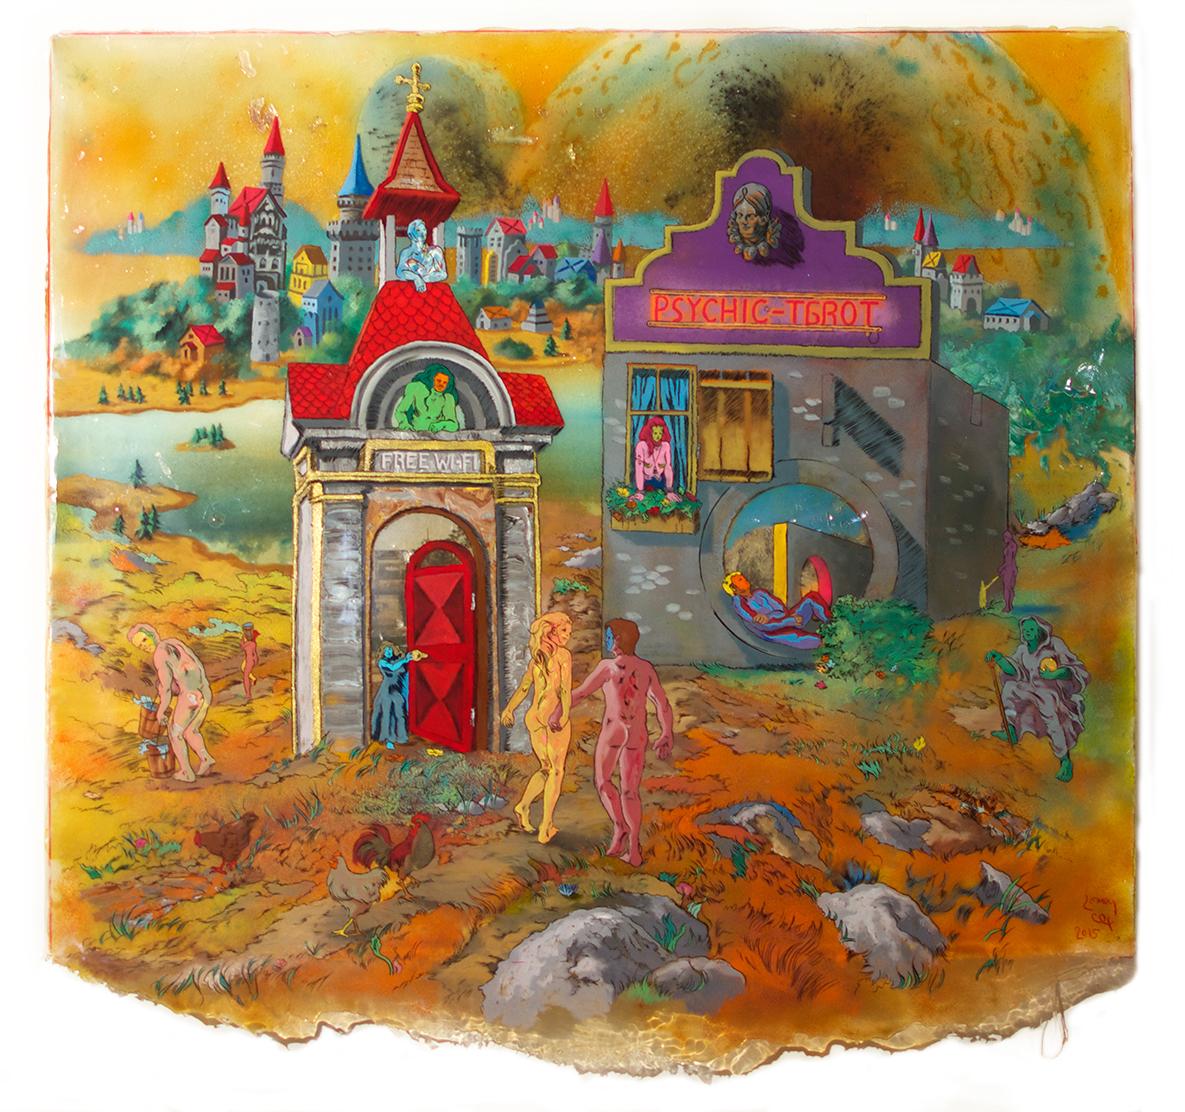 Andrew LeMay Cox Figurative Painting - Psychic-Tarot, brightly colored scene, ink on canvas with photographs